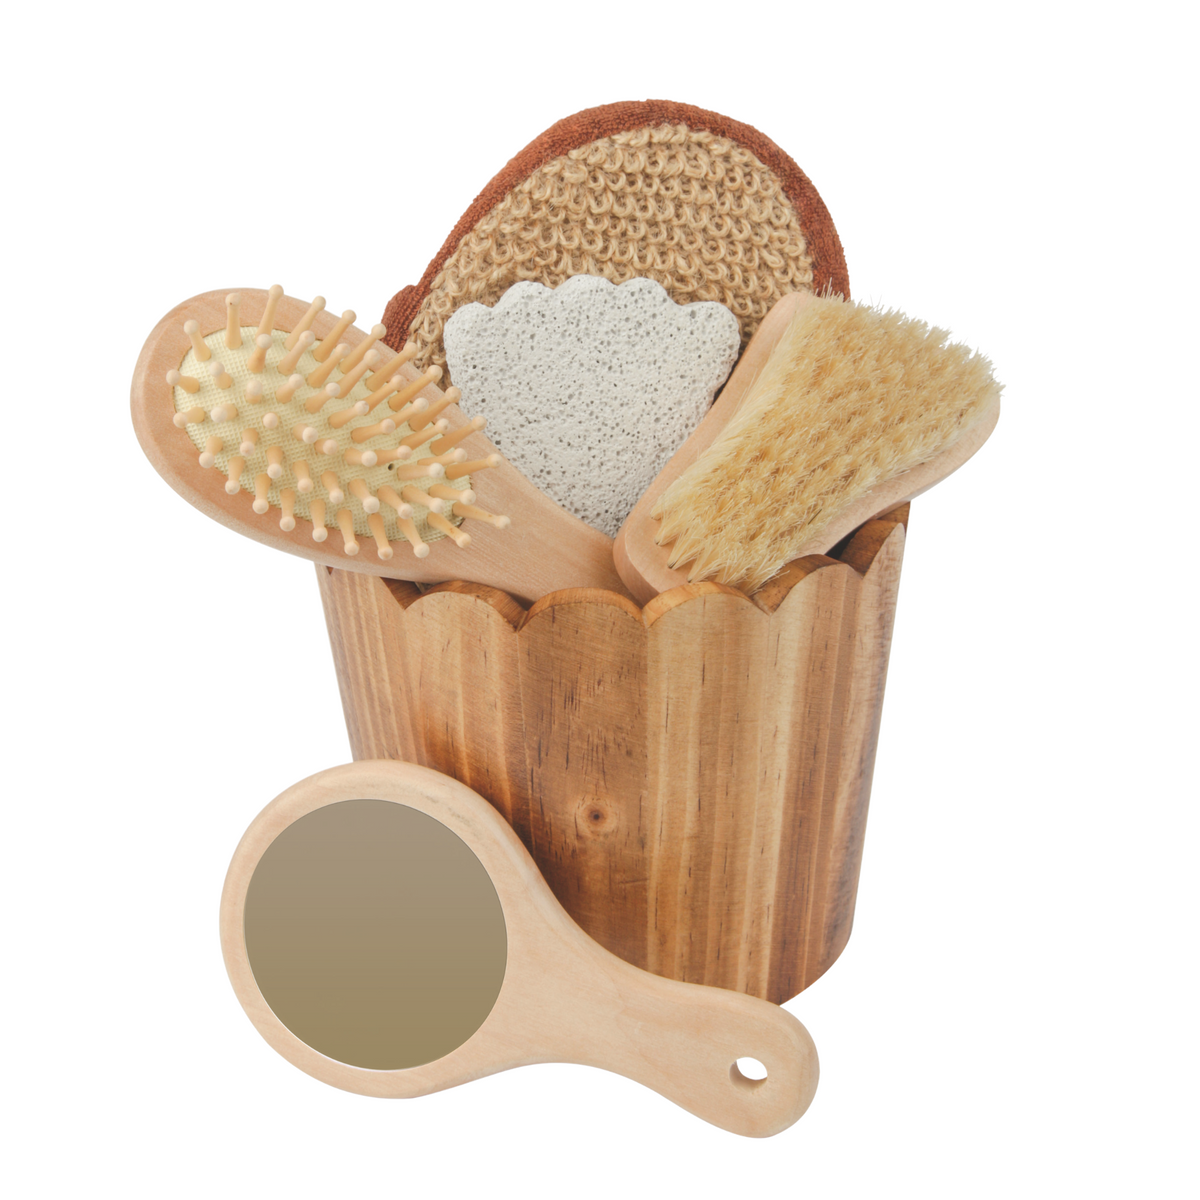 Bath Accessory Gift set in Toasted Wooden Bucket